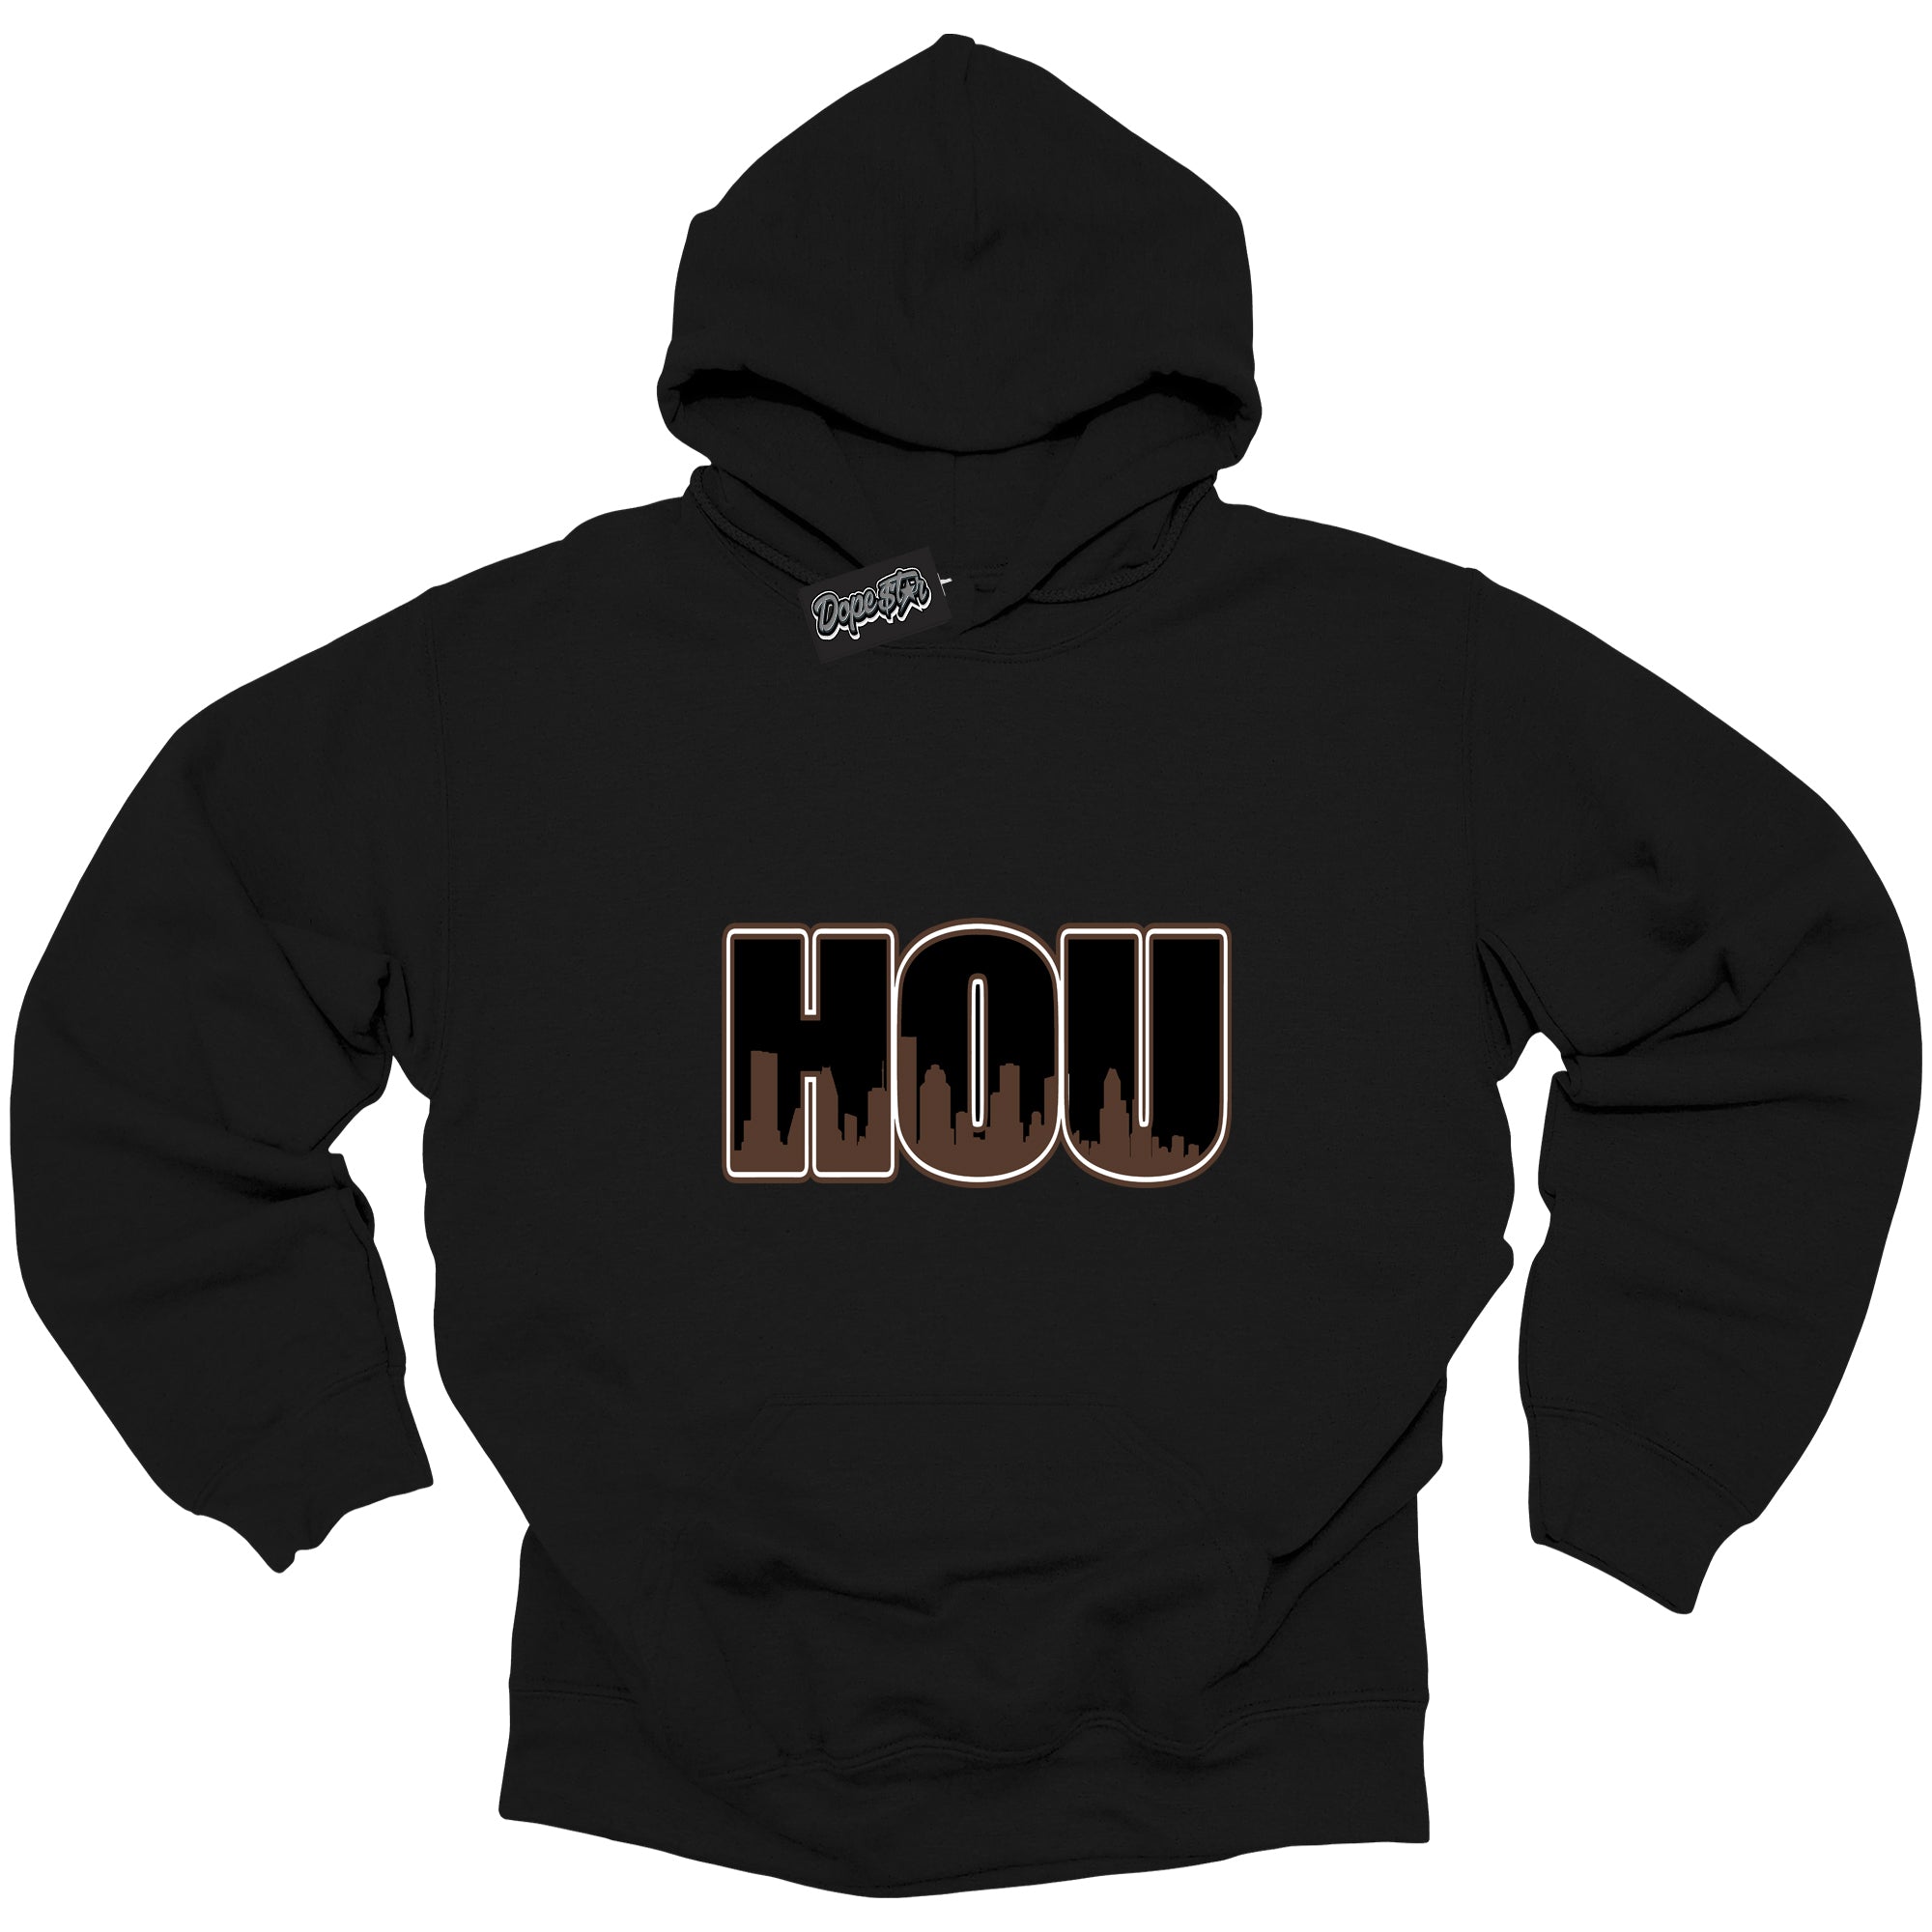 Cool Black Graphic DopeStar Hoodie with “ Houston “ print, that perfectly matches Palomino 1s sneakers